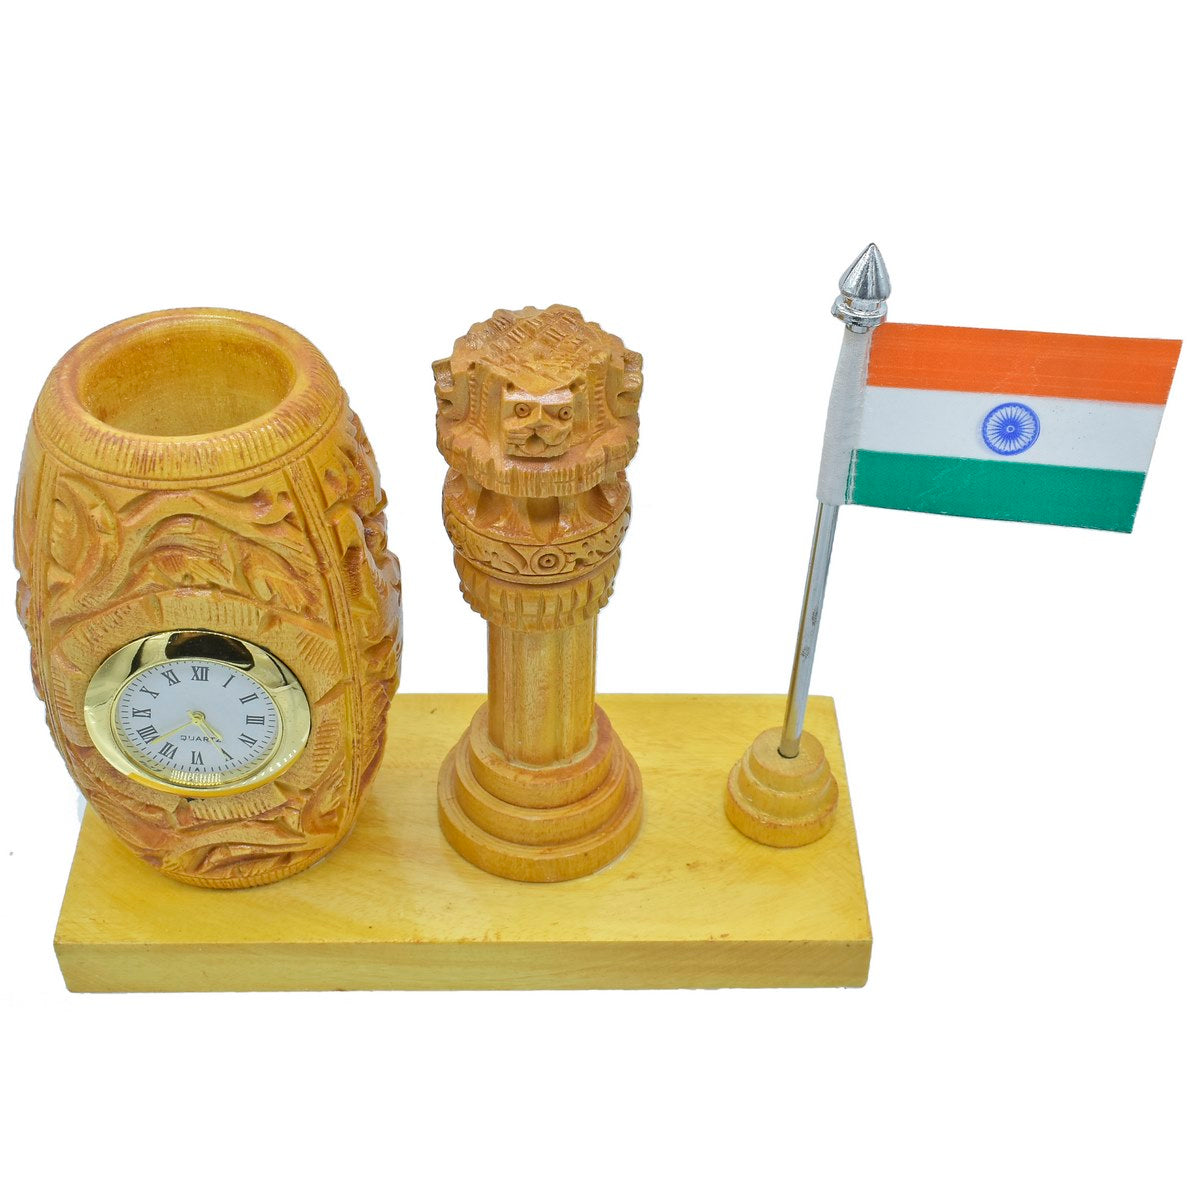 Wooden Pen Stand cum Clock with Ashoka Pillar and Indian Flag Table Top - For Corporate Gifting, Office, School, College Use, Independence Day, Republic Day Gift Item JAWTTP01